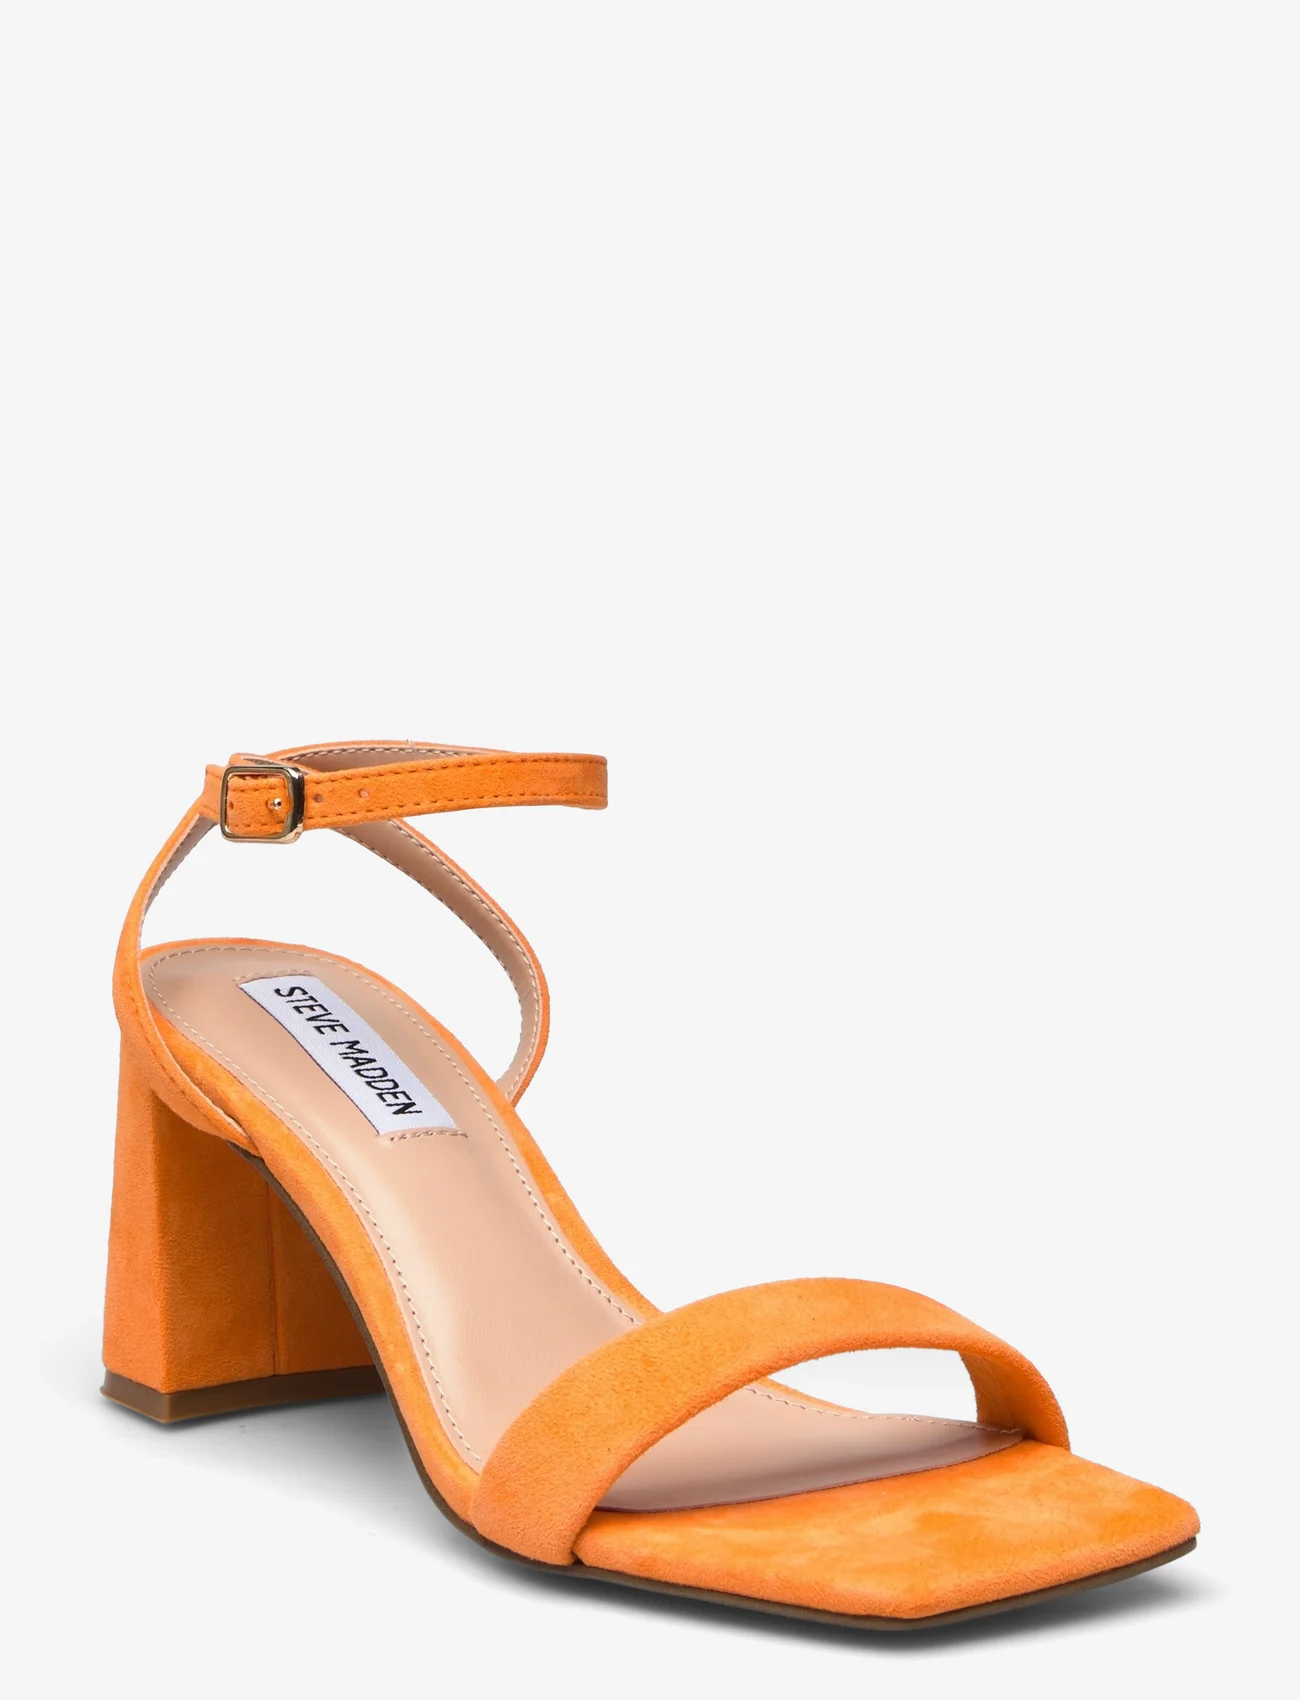 Steve Madden - Luxe Sandal - party wear at outlet prices - orange suede - 0